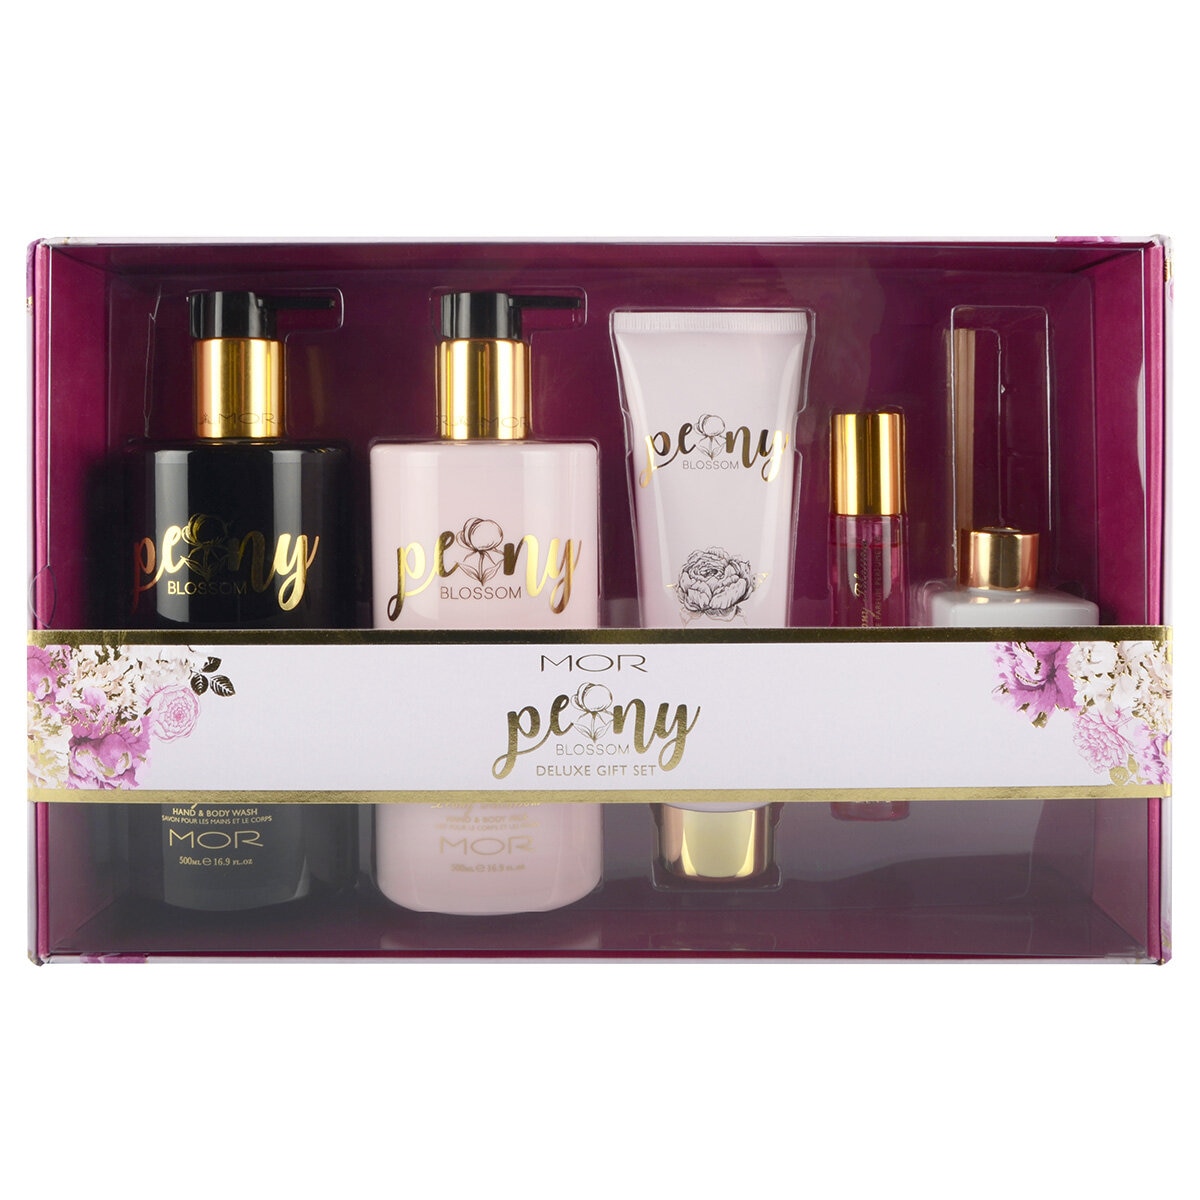 MOR Peony Blossom Deluxe 5 Piece Giftset